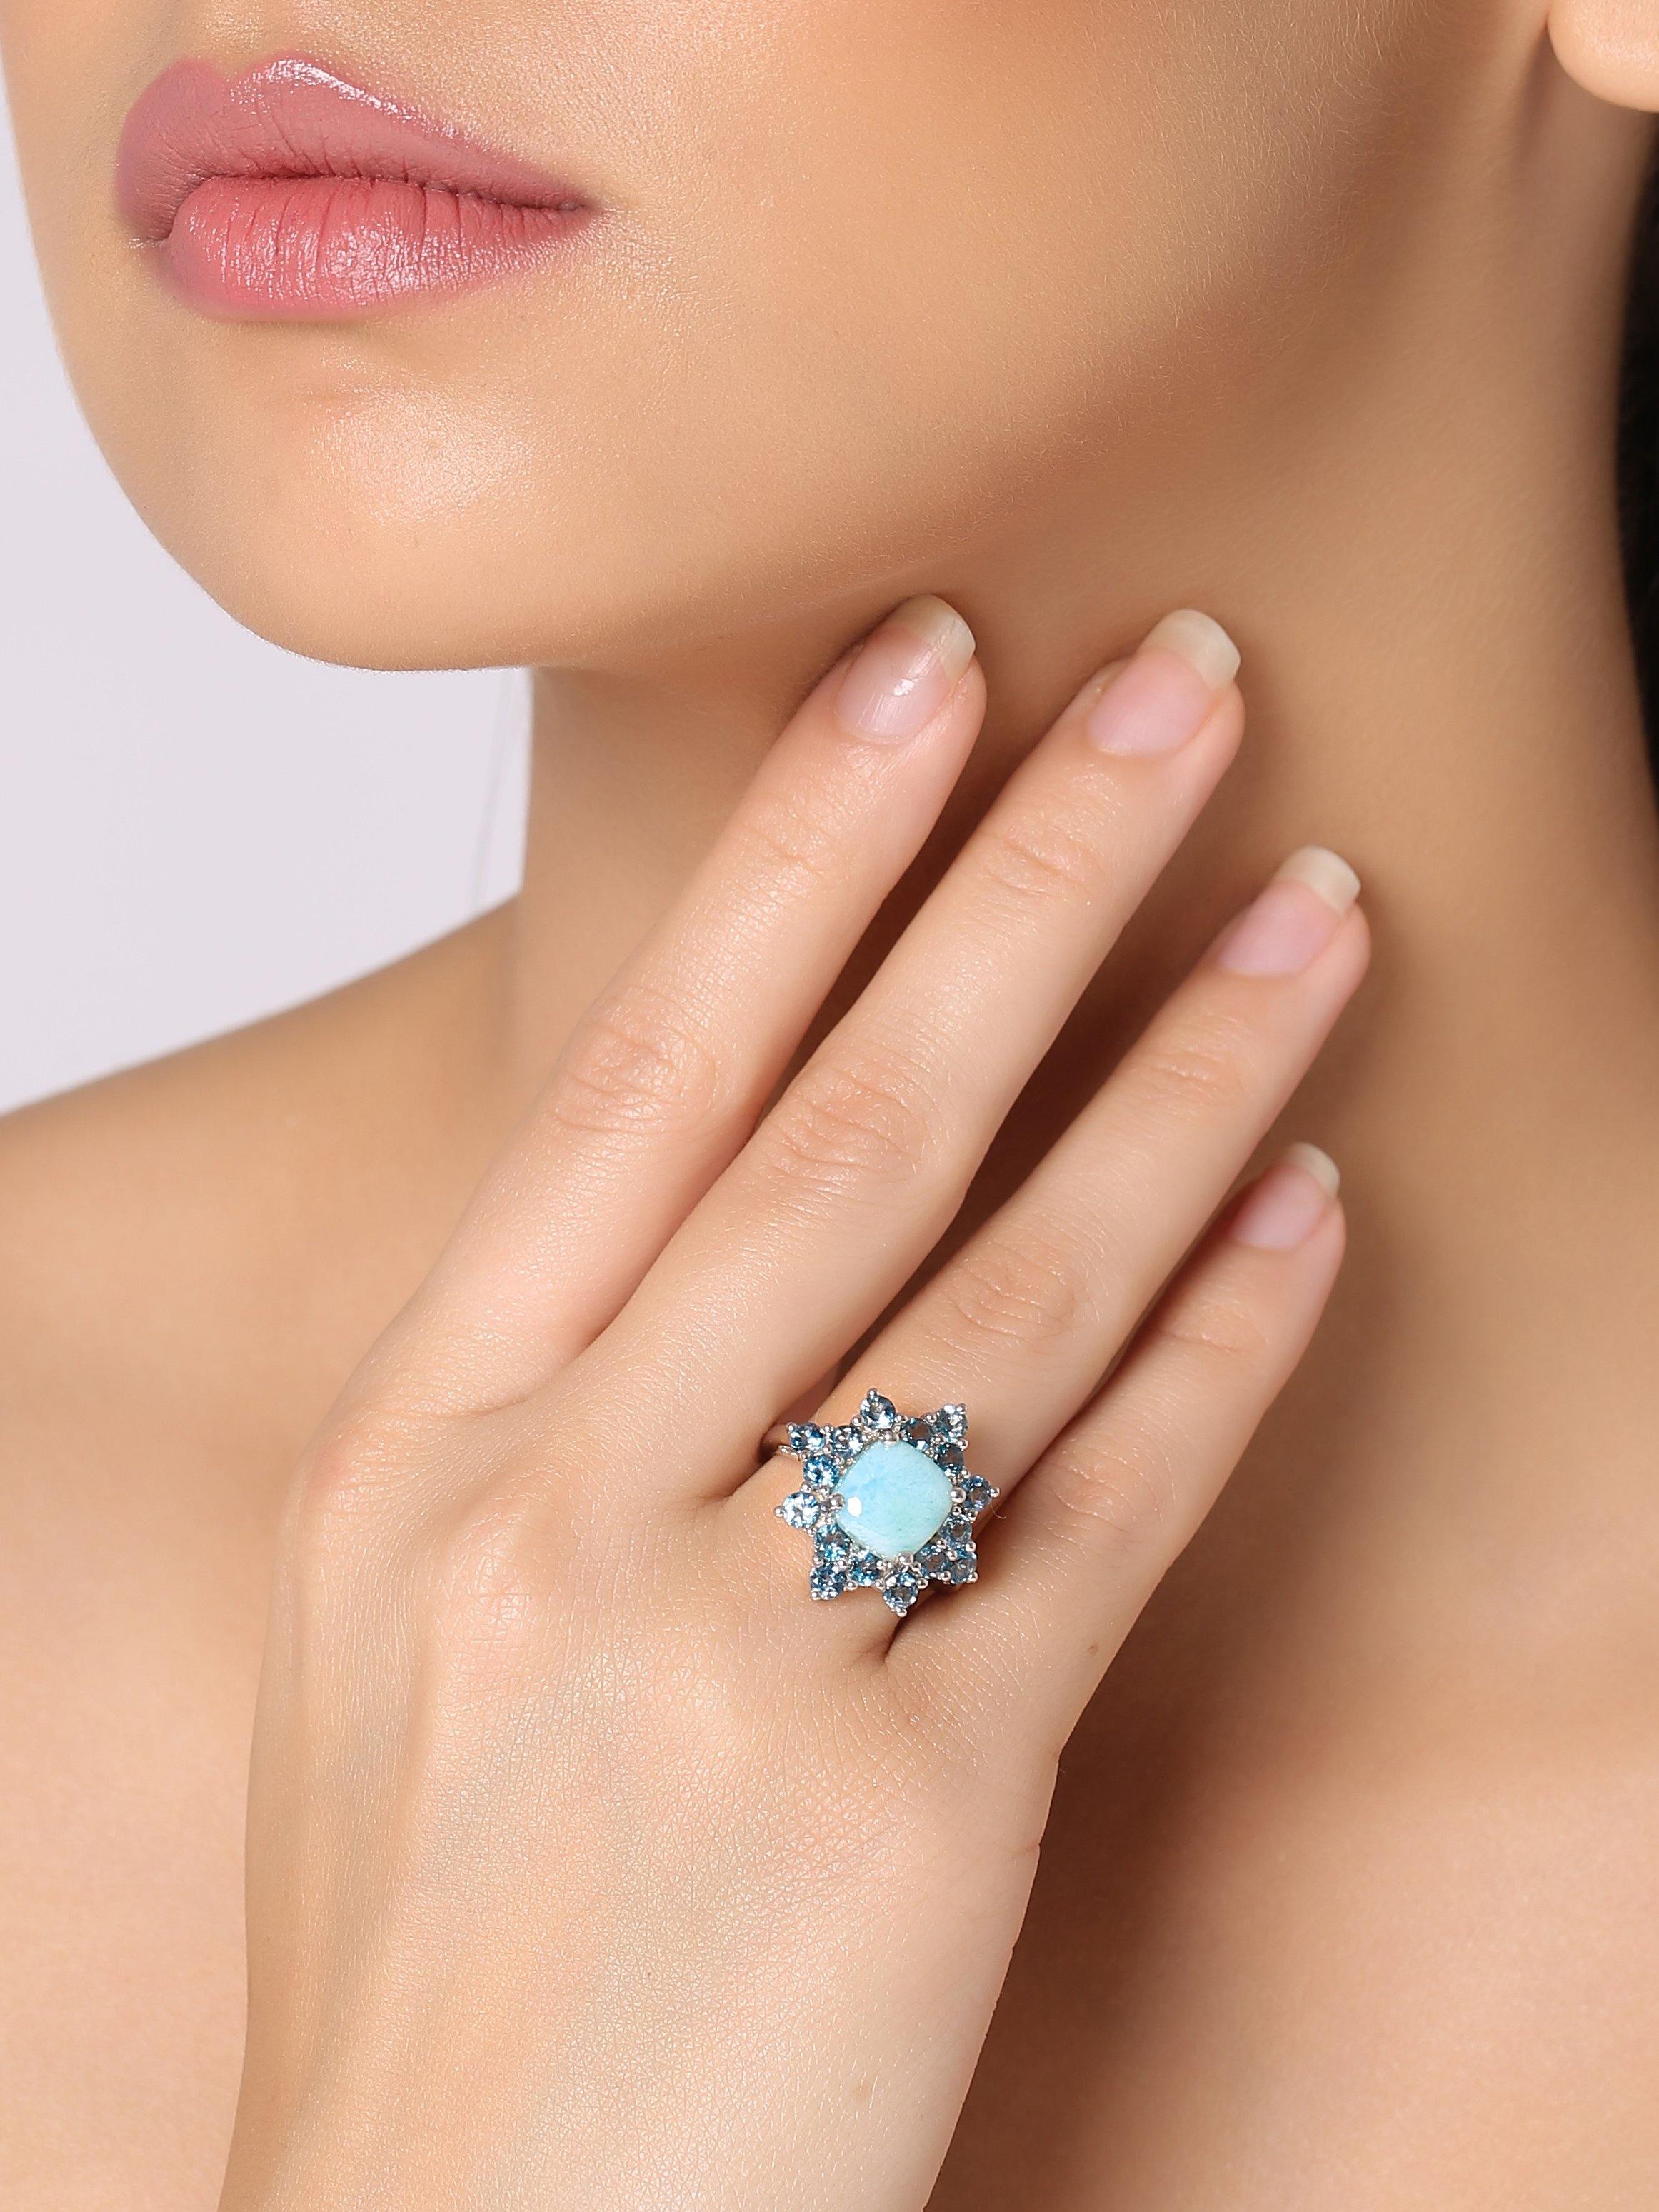 5.40 Cts. Larimar London Blue Topaz Solid 925 Sterling Silver Cluster Ring Jewelry - YoTreasure